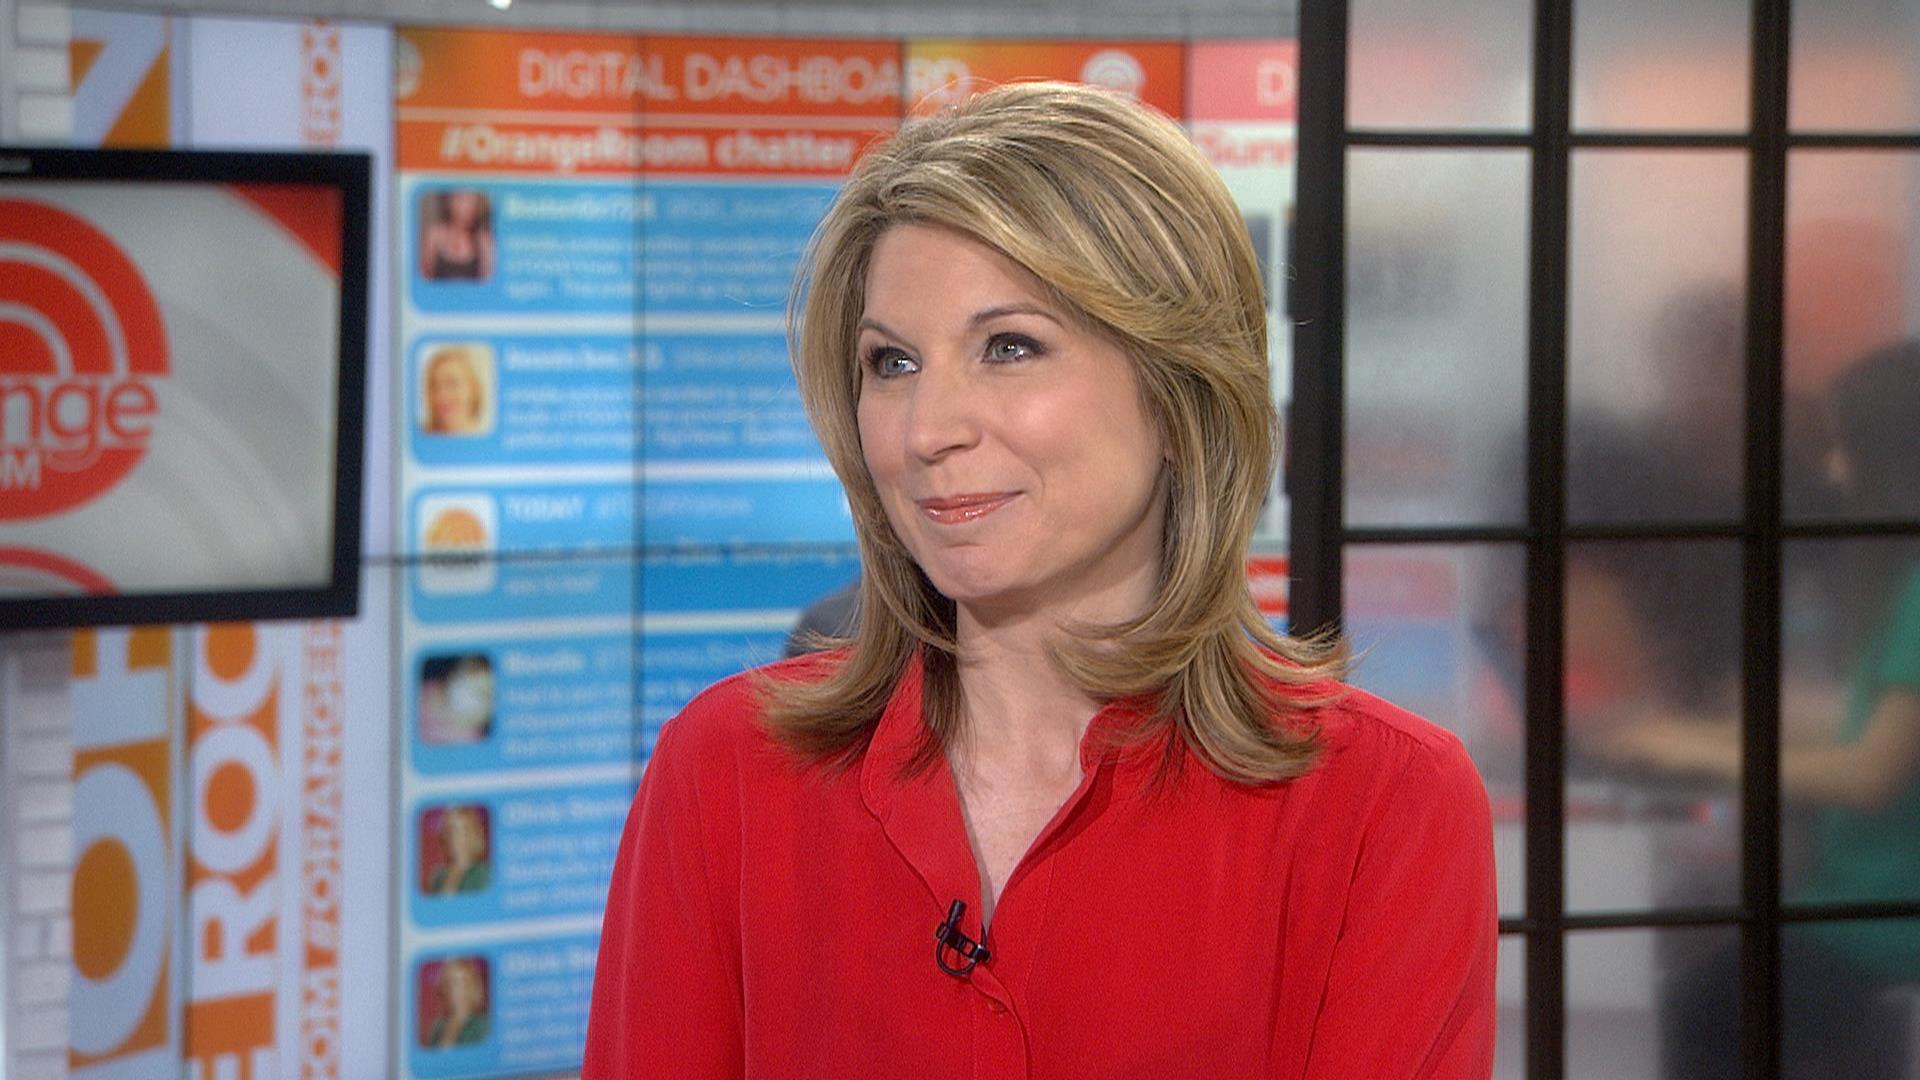 Analyst Nicolle Wallace: 'There are no white horses' to save GOP - TODAY.com1920 x 1080